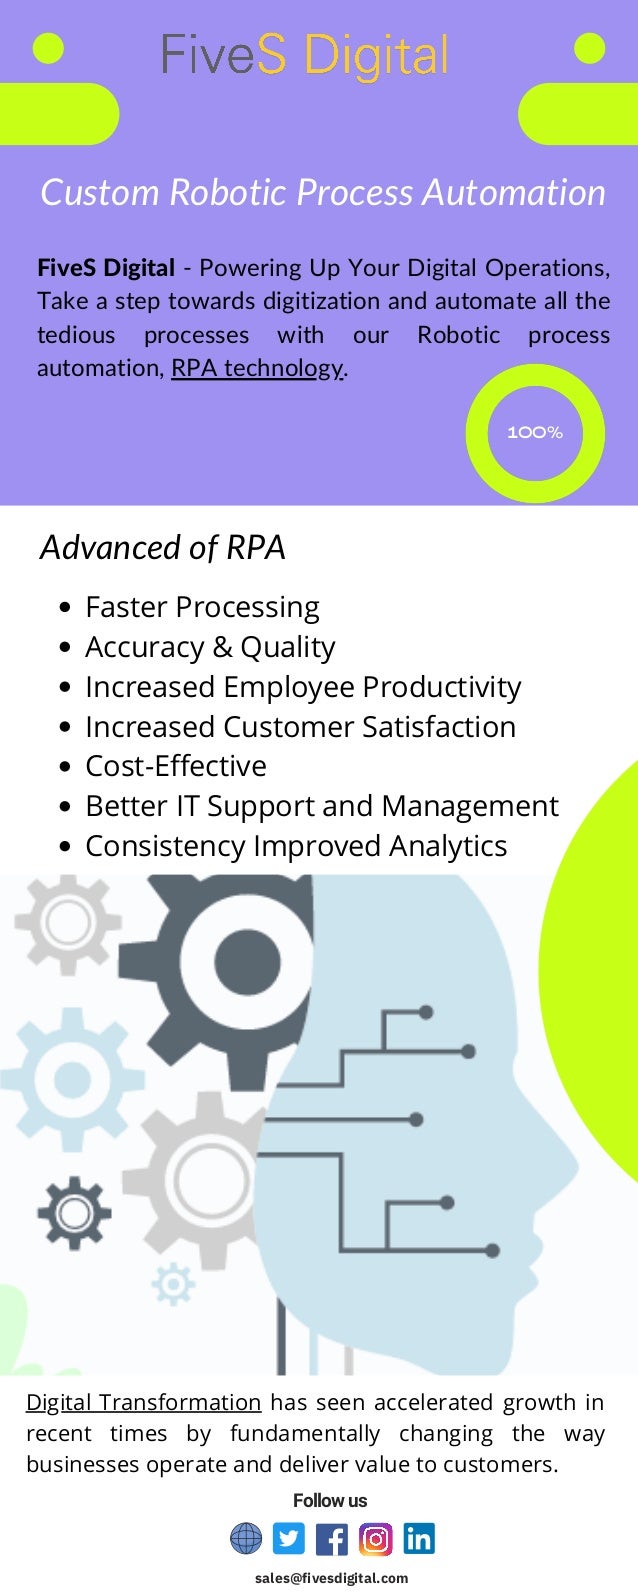 100%
Custom Robotic Process Automation
Faster Processing
Accuracy & Quality
Increased Employee Productivity
Increased Customer Satisfaction
Cost-Effective
Better IT Support and Management
Consistency Improved Analytics
Advanced of RPA
FiveS Digital - Powering Up Your Digital Operations,
Take a step towards digitization and automate all the
tedious processes with our Robotic process
automation, RPA technology.
Follow us
sales@fivesdigital.com
Digital Transformation has seen accelerated growth in
recent times by fundamentally changing the way
businesses operate and deliver value to customers.
 